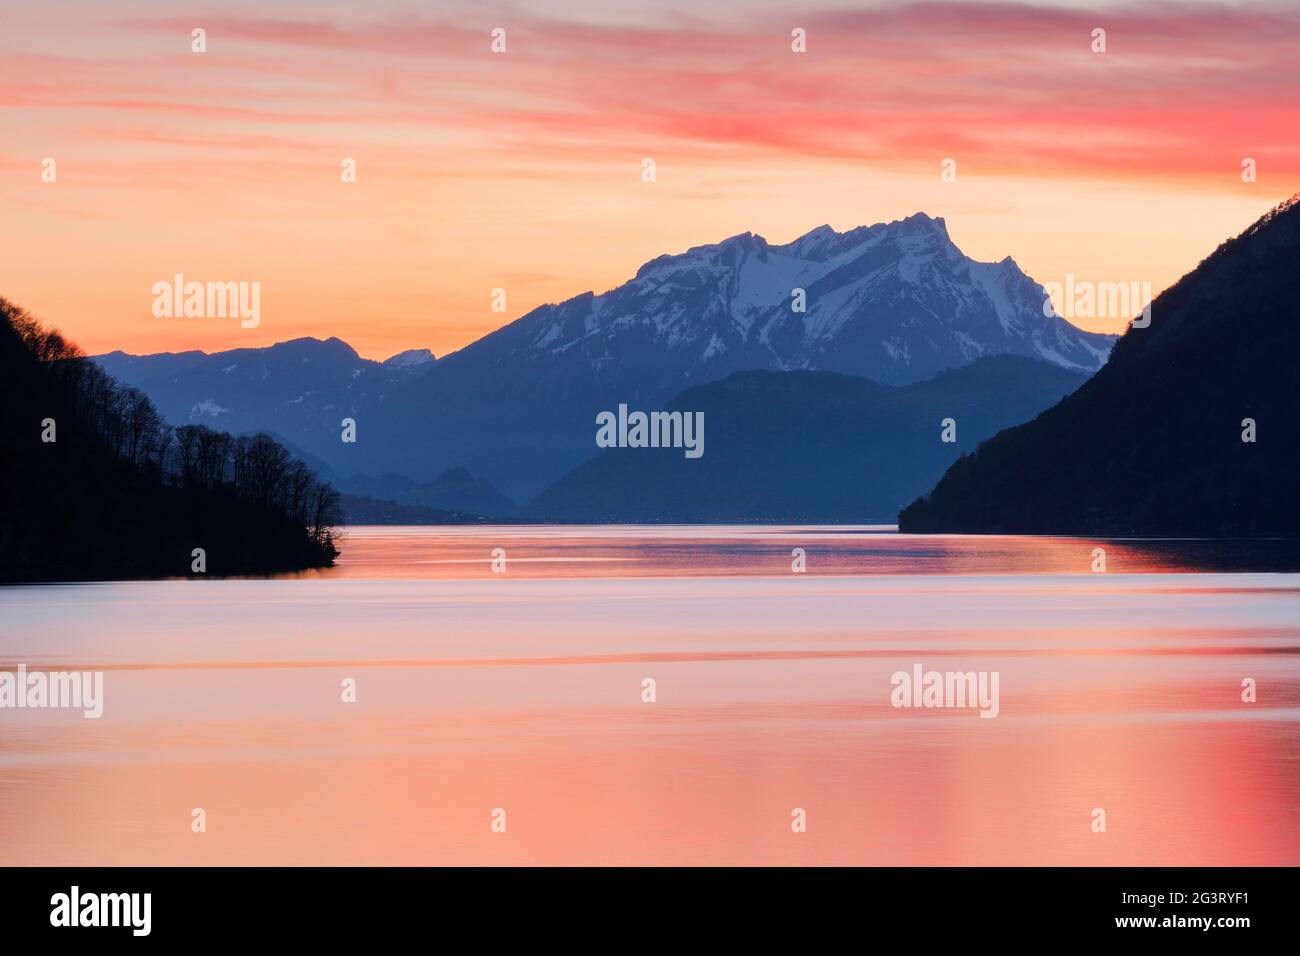 lake with mountain scenery, vista from Brunnen over Lake Lucerne at sunset, Mount Pilatus in the background, Switzerland Stock Photo